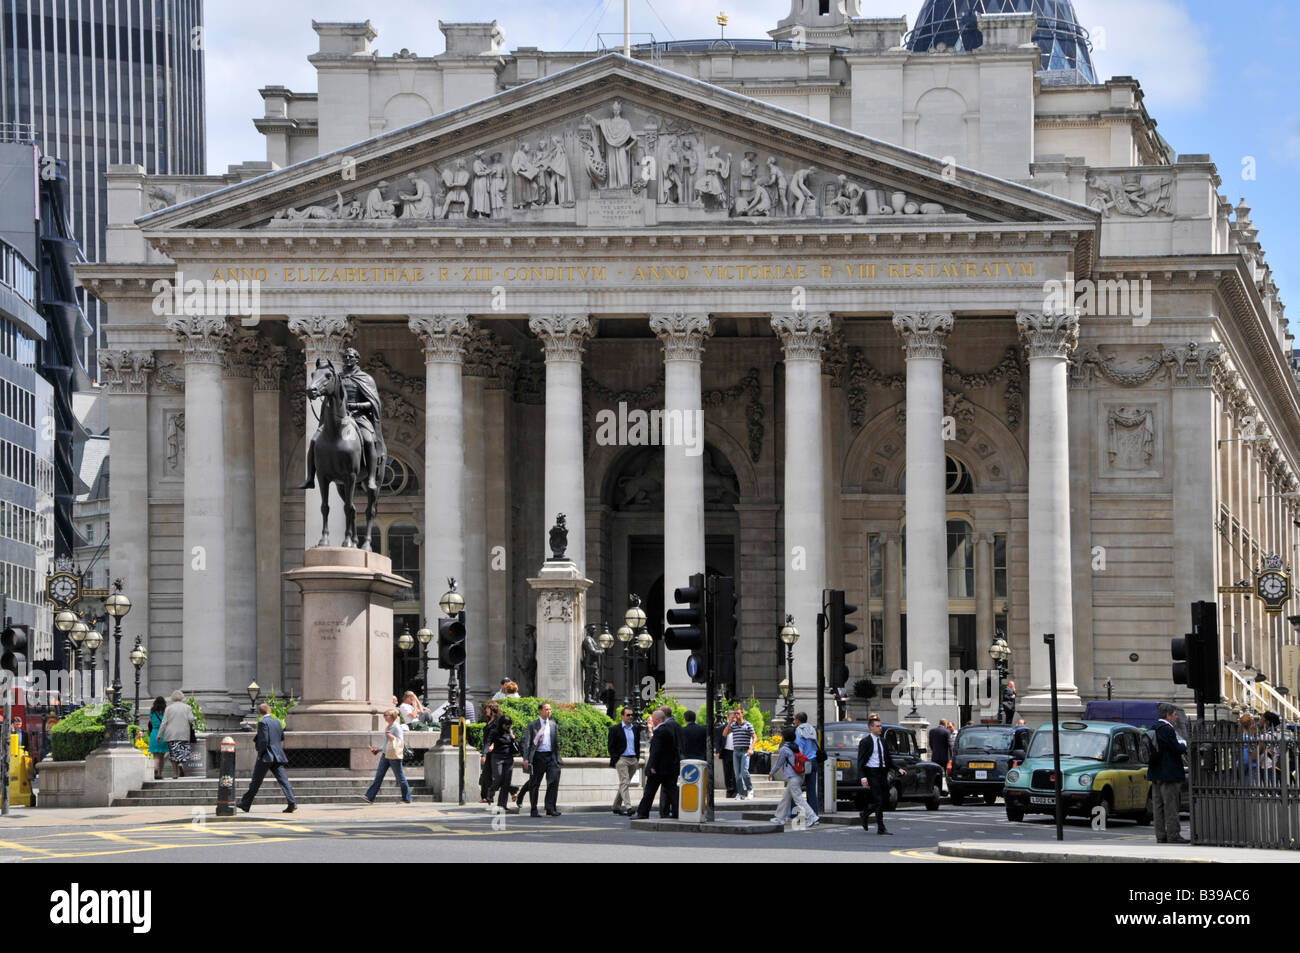 Historical Royal Exchange building colonnade with statue of Wellington on horseback busy Bank road junction The Square Mile City of London England UK Stock Photo